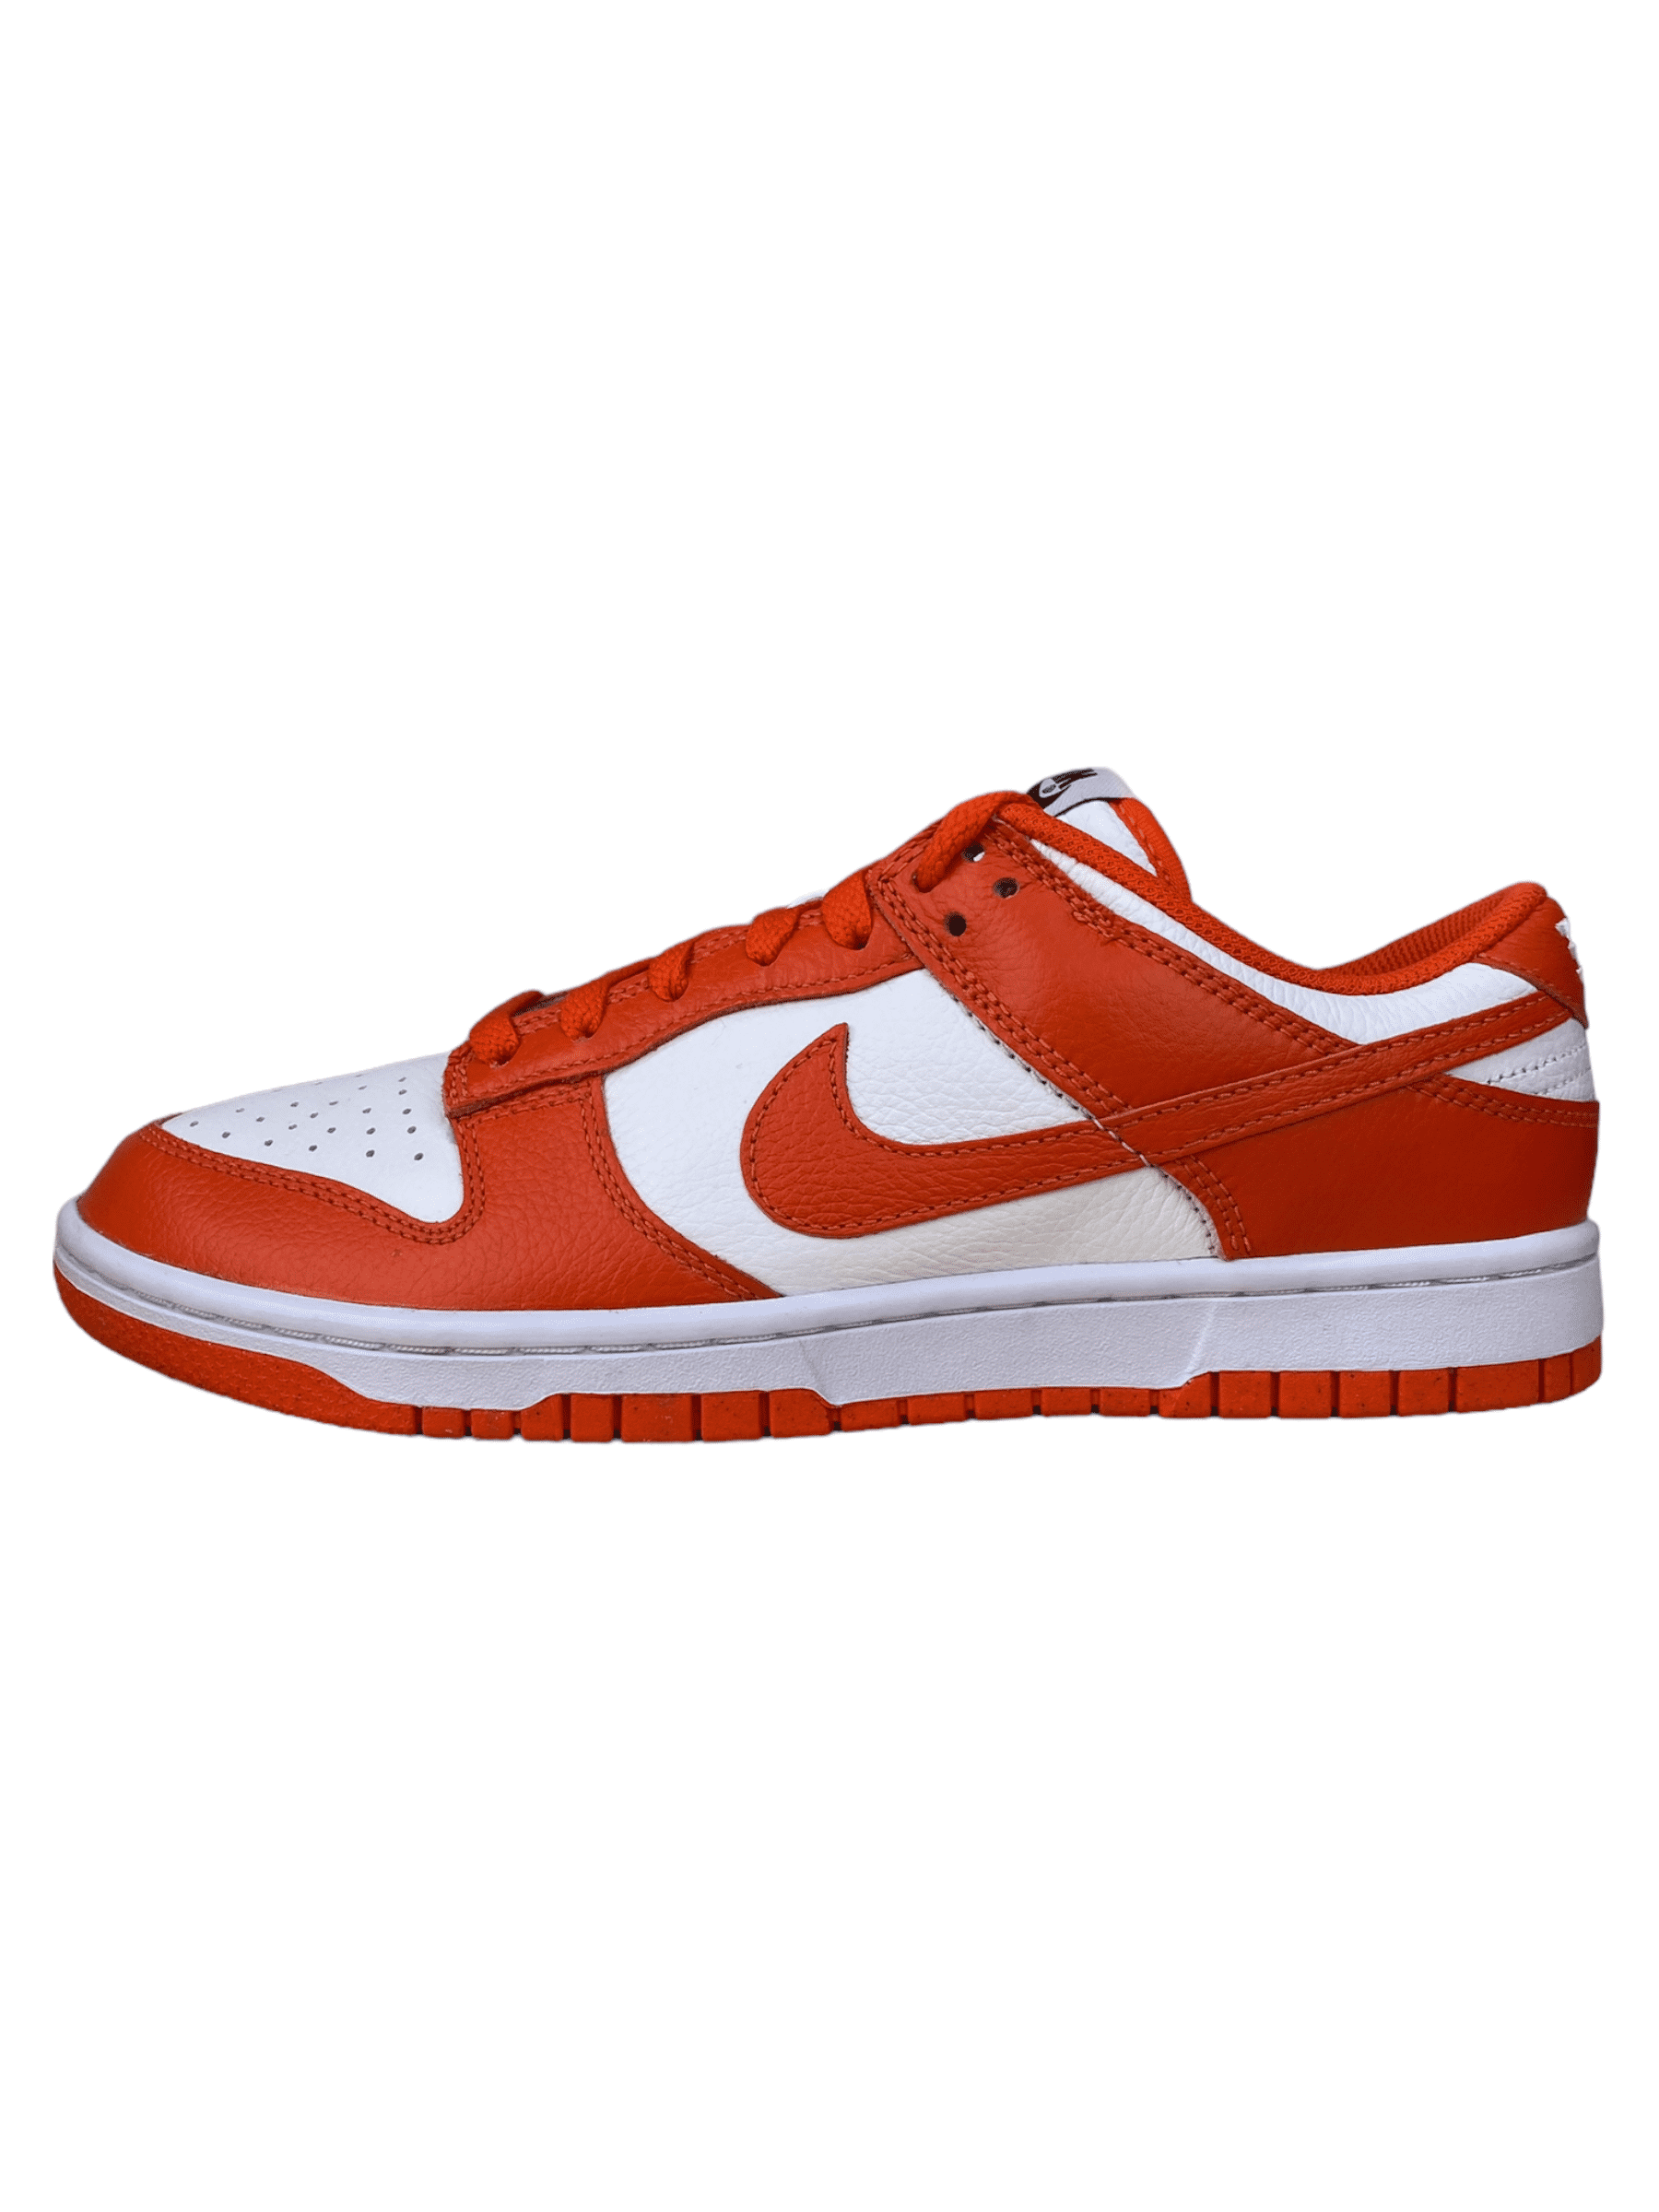 Nike Dunk Low Syracuse Sneakers - Genuine Design Luxury Consignment for Men. New & Pre-Owned Clothing, Shoes, & Accessories. Calgary, Canada